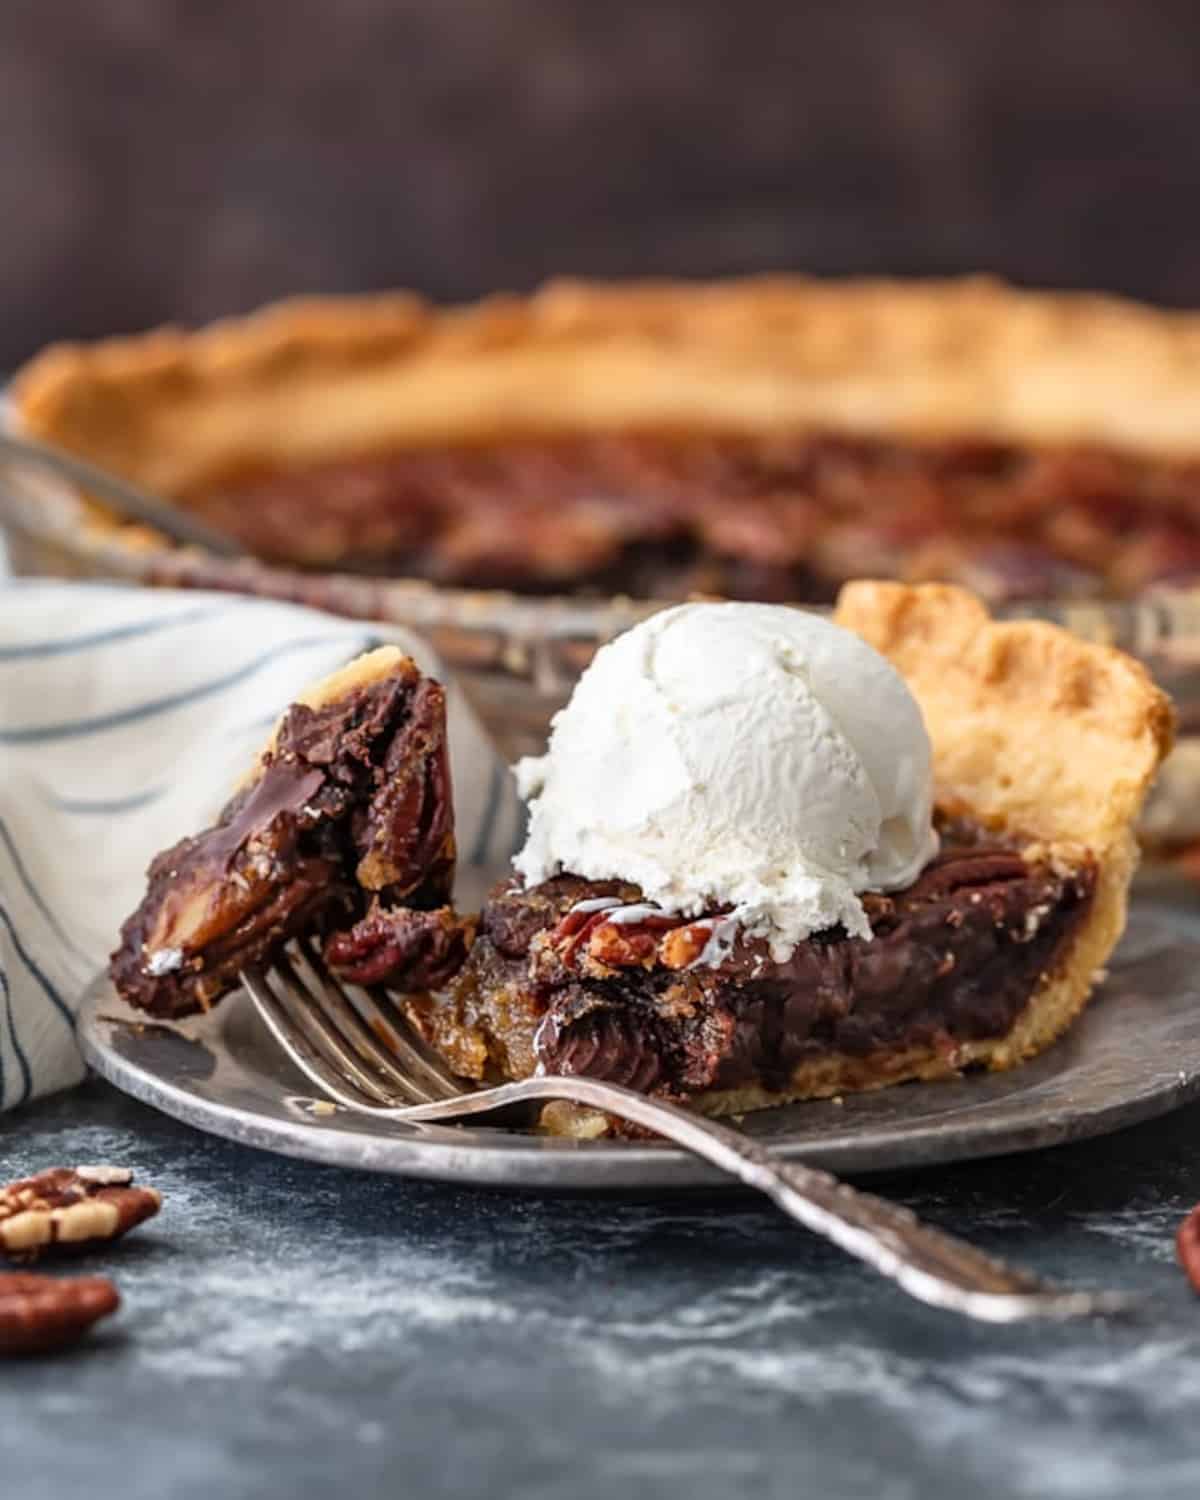 Pecan pie with chocolate on a plate.